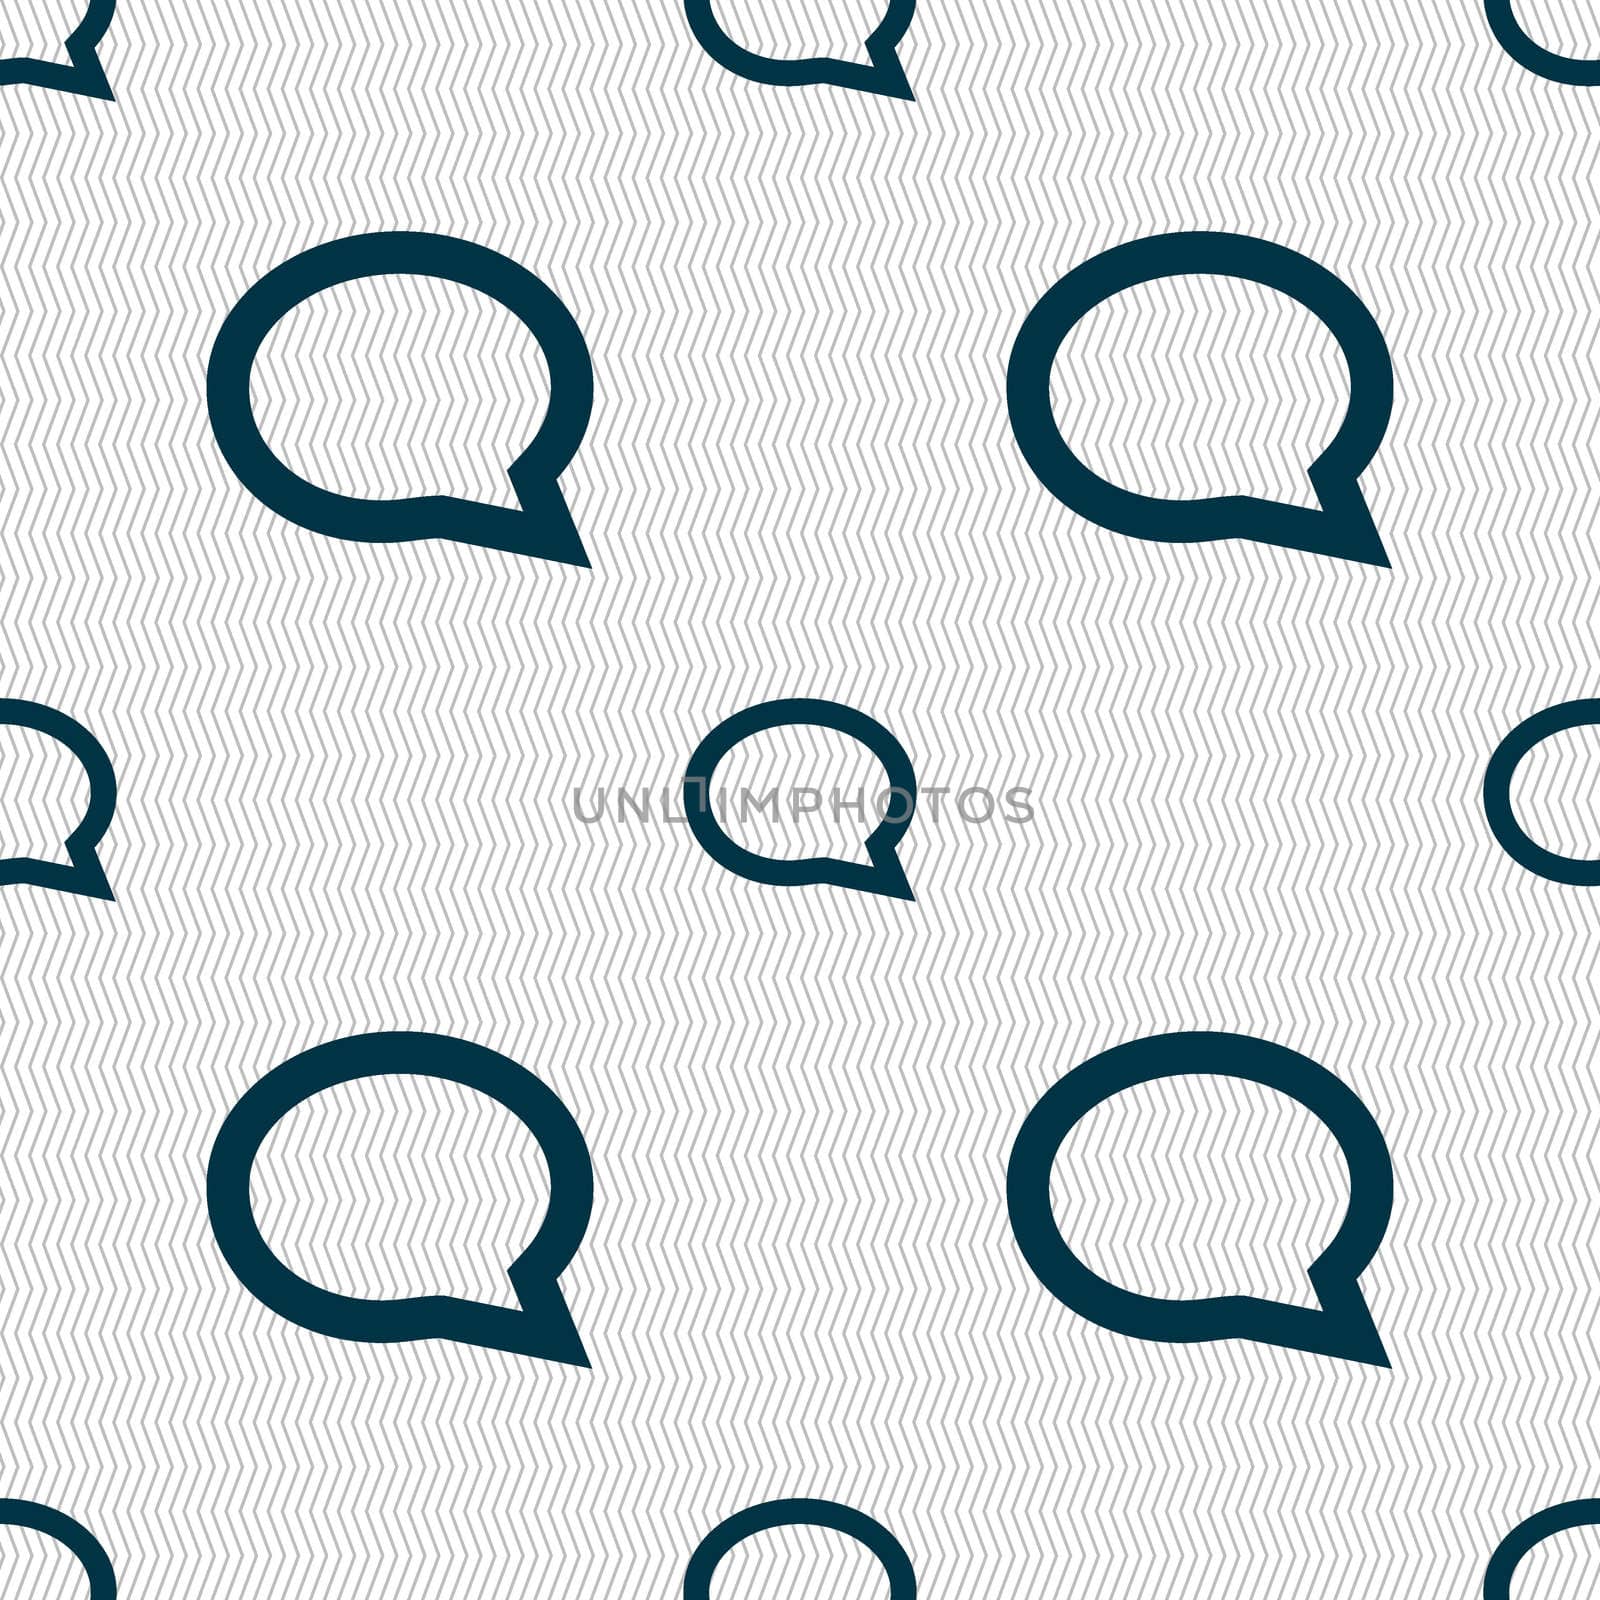 Speech bubble icons. Think cloud symbols. Seamless abstract background with geometric shapes. illustration